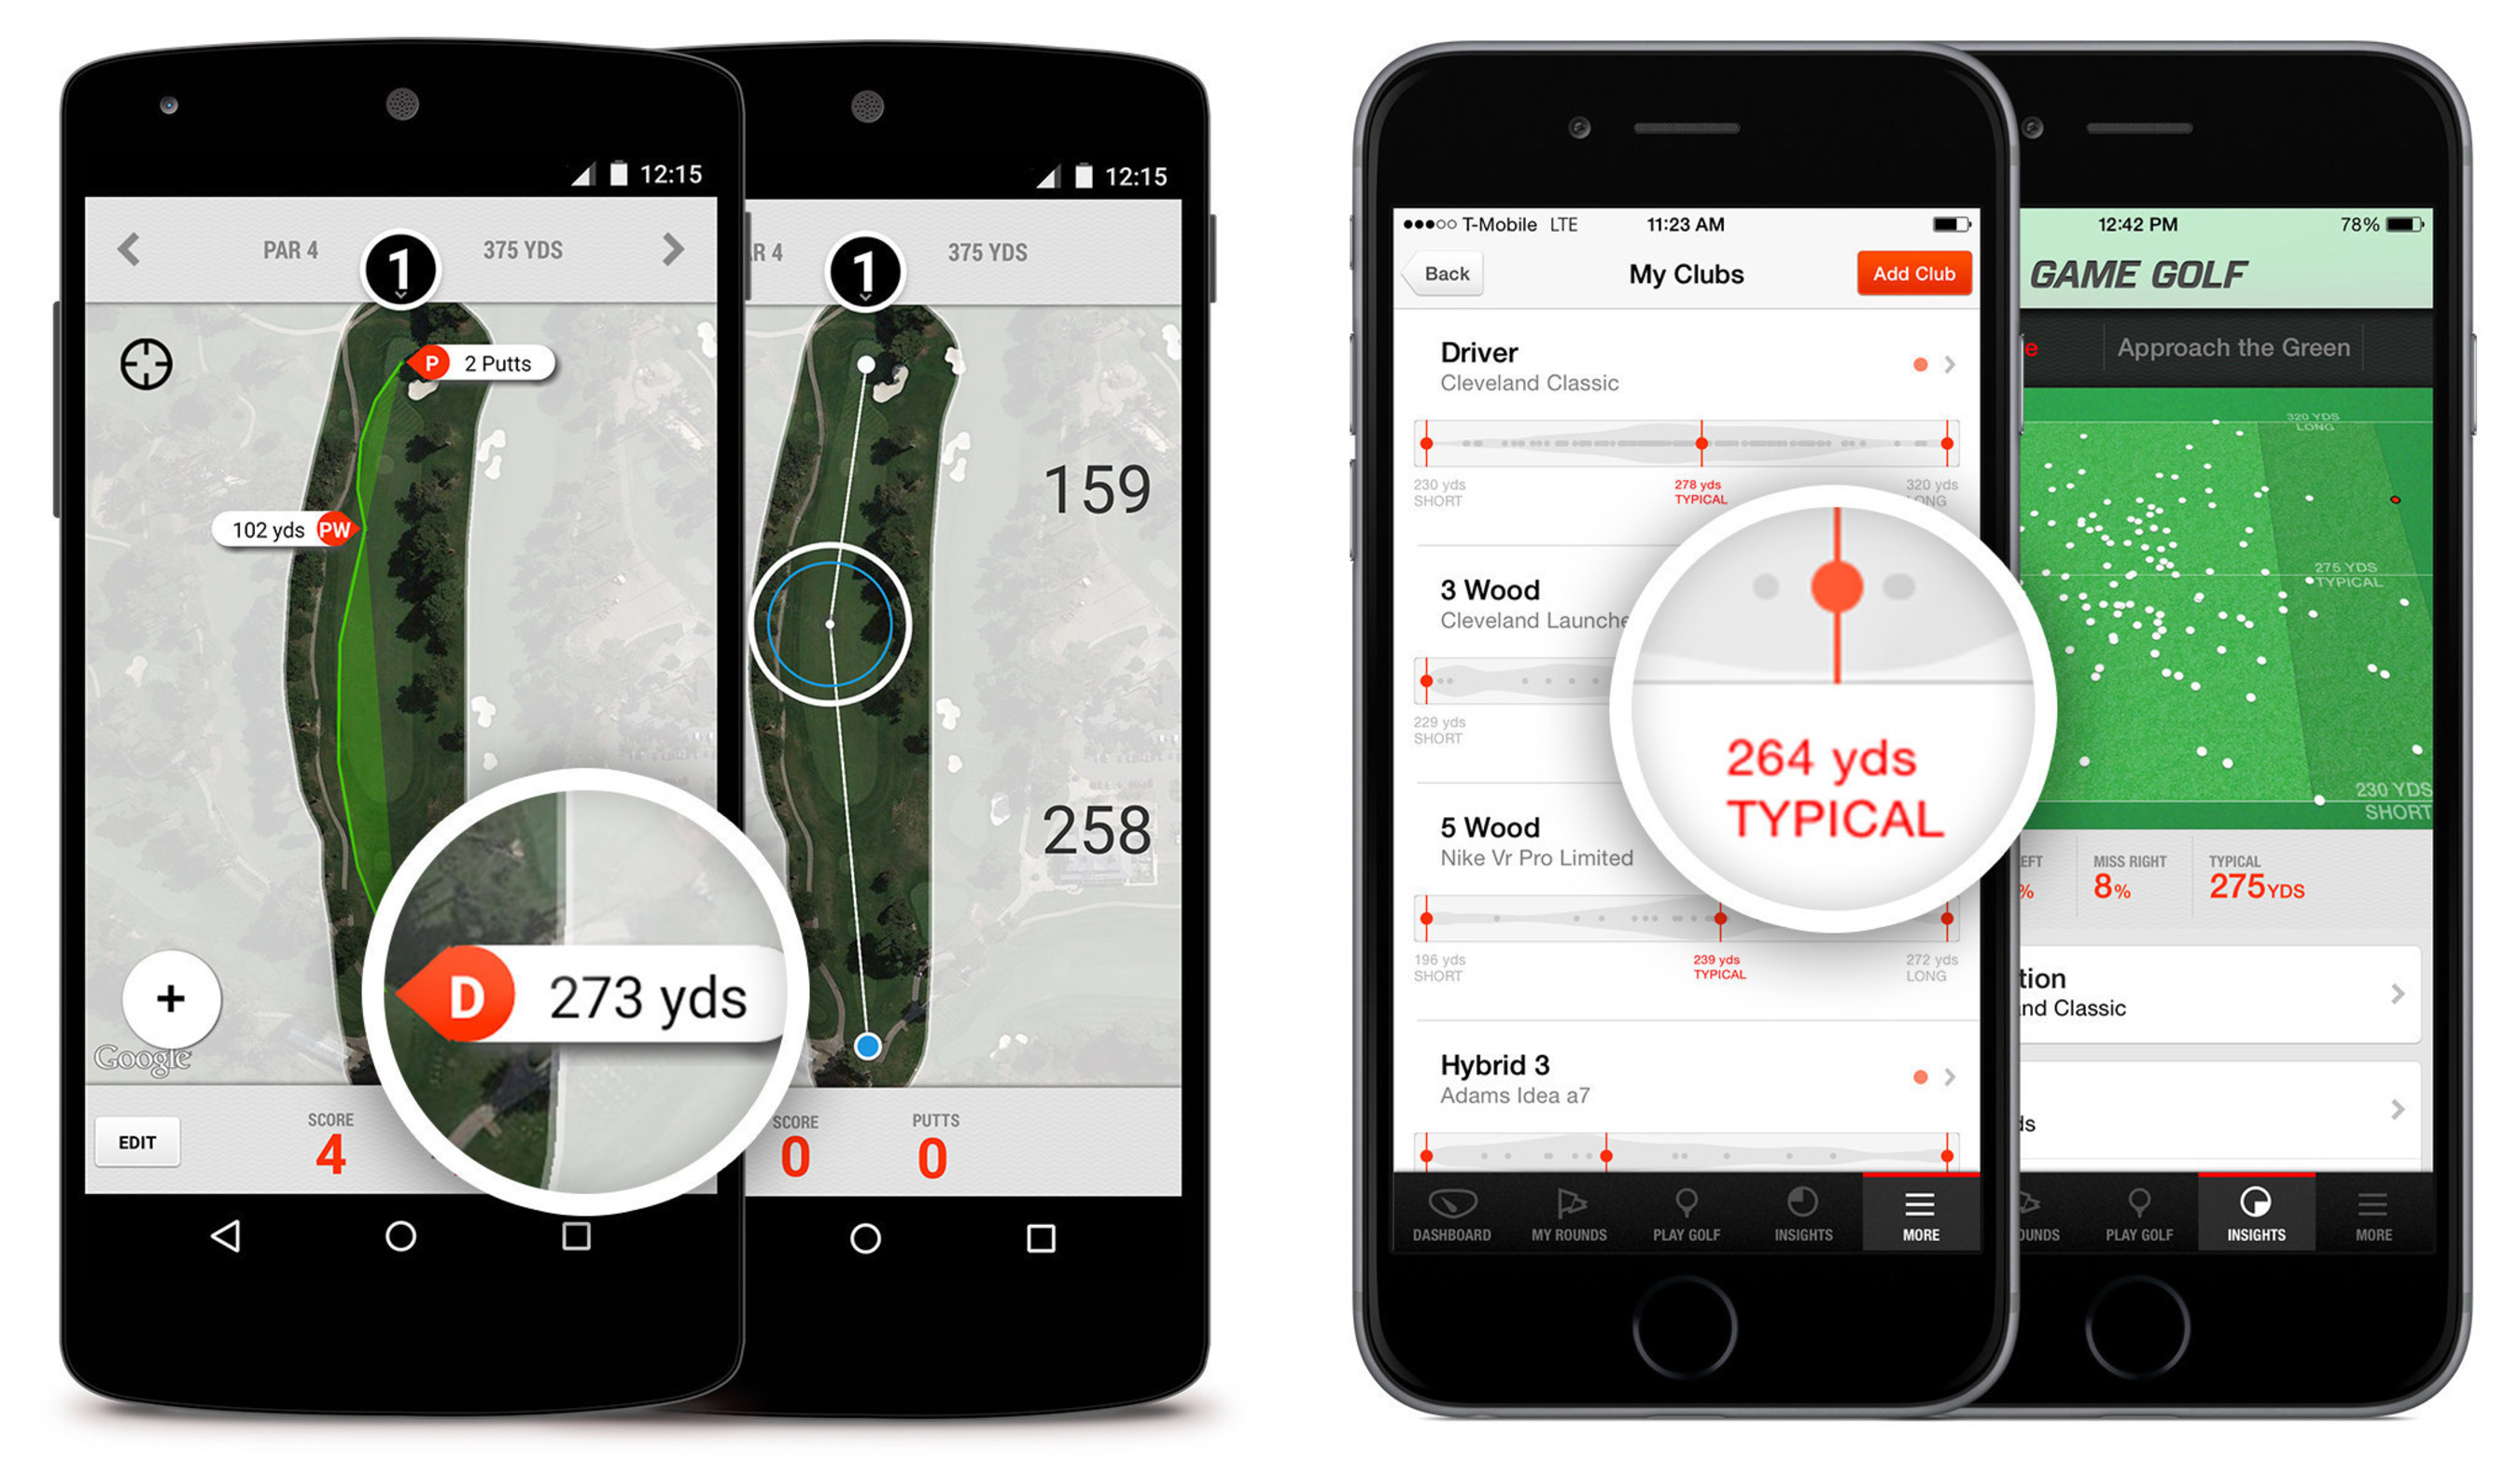 Free GAME GOLF Tracking App Available for iOS and Android Devices